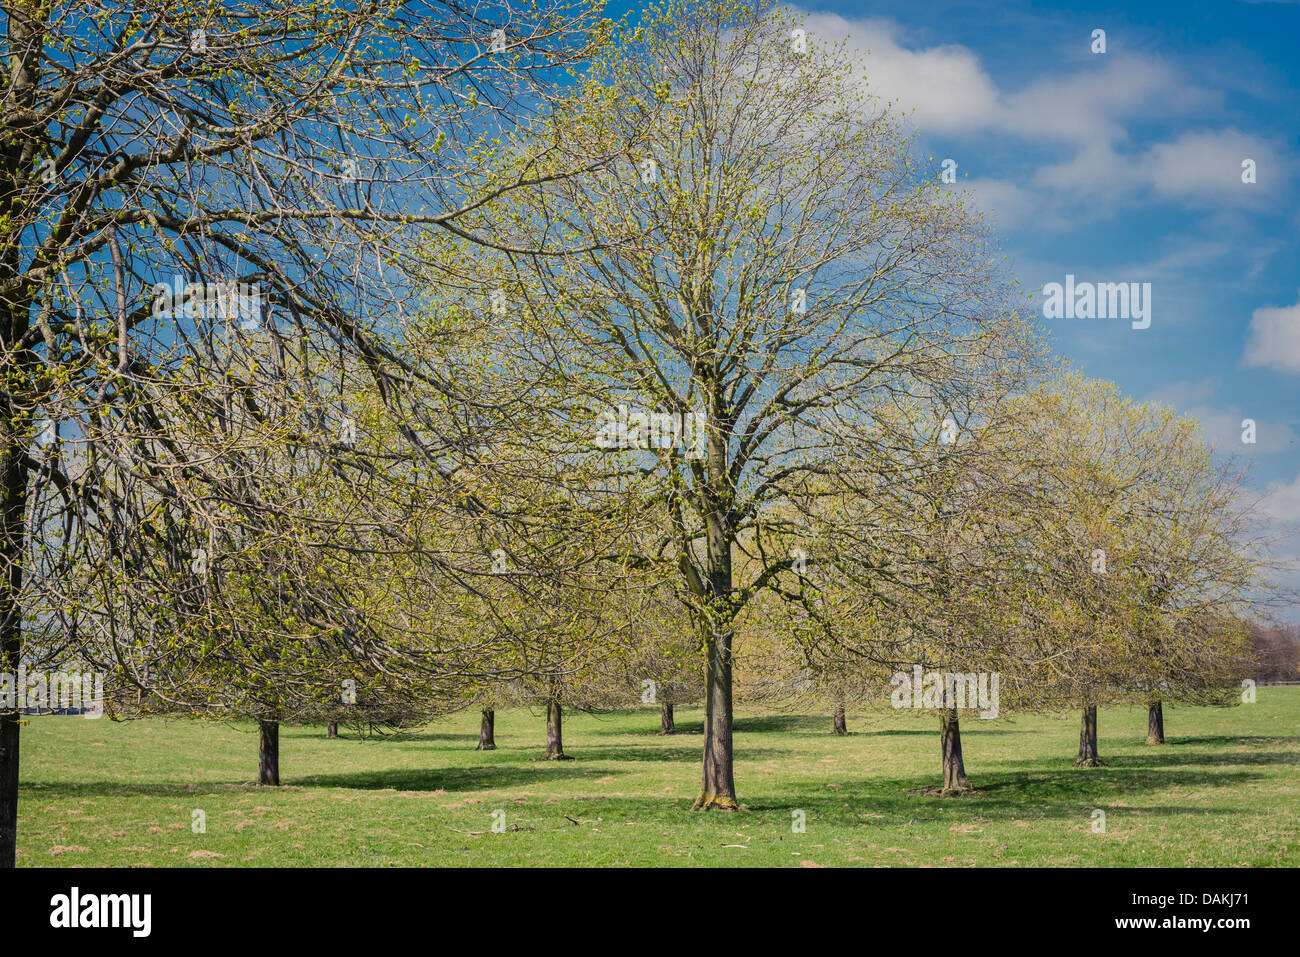 Row of Ash trees in the Blenheim Palace gardens, Woodstock, Oxfordshire, United Kingdom Stock Photo